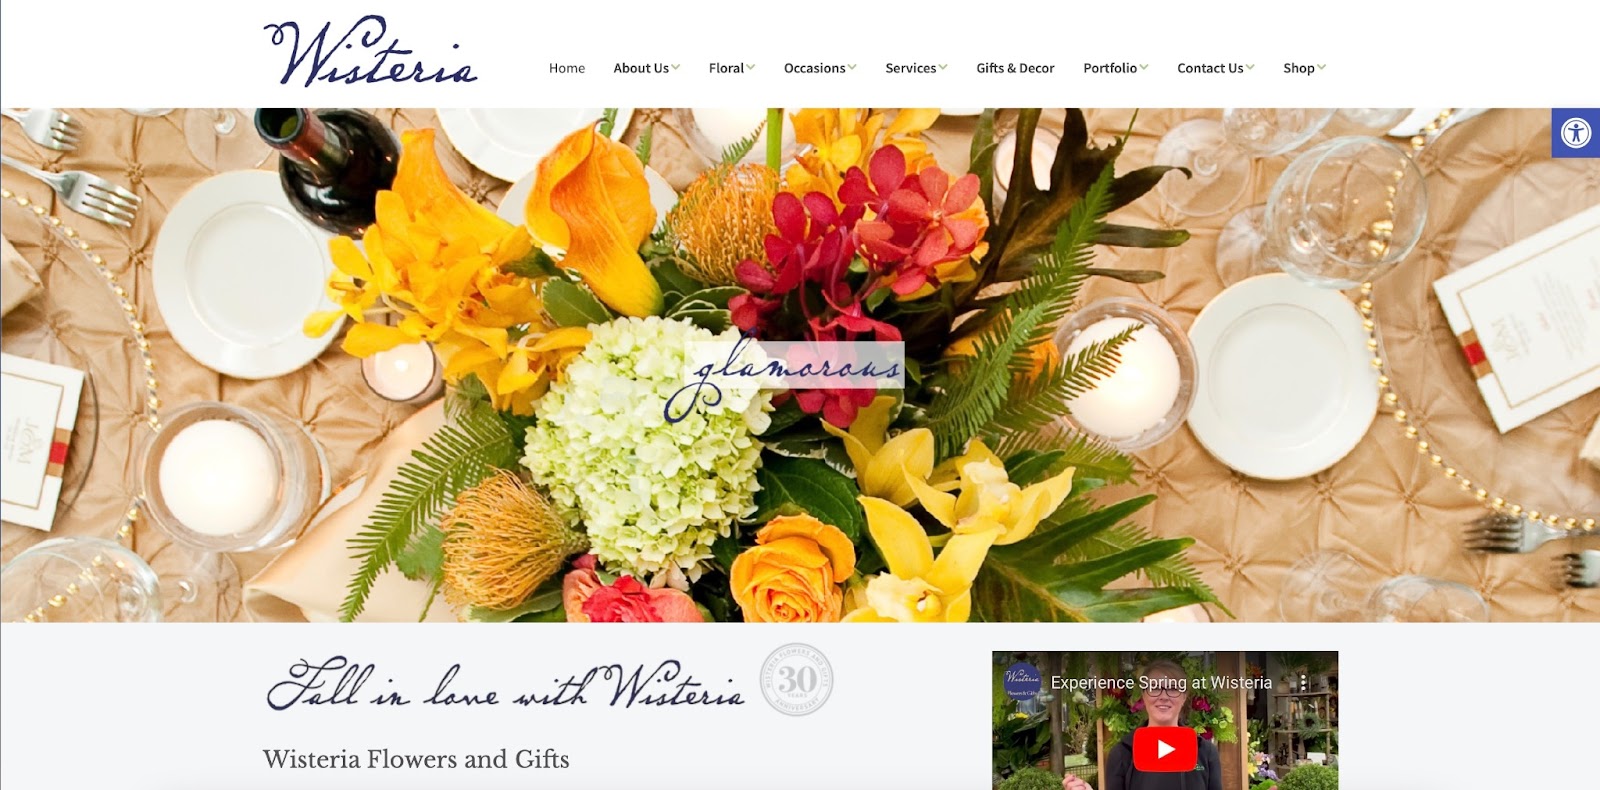 Wisteria Flowers and Gifts Company Page